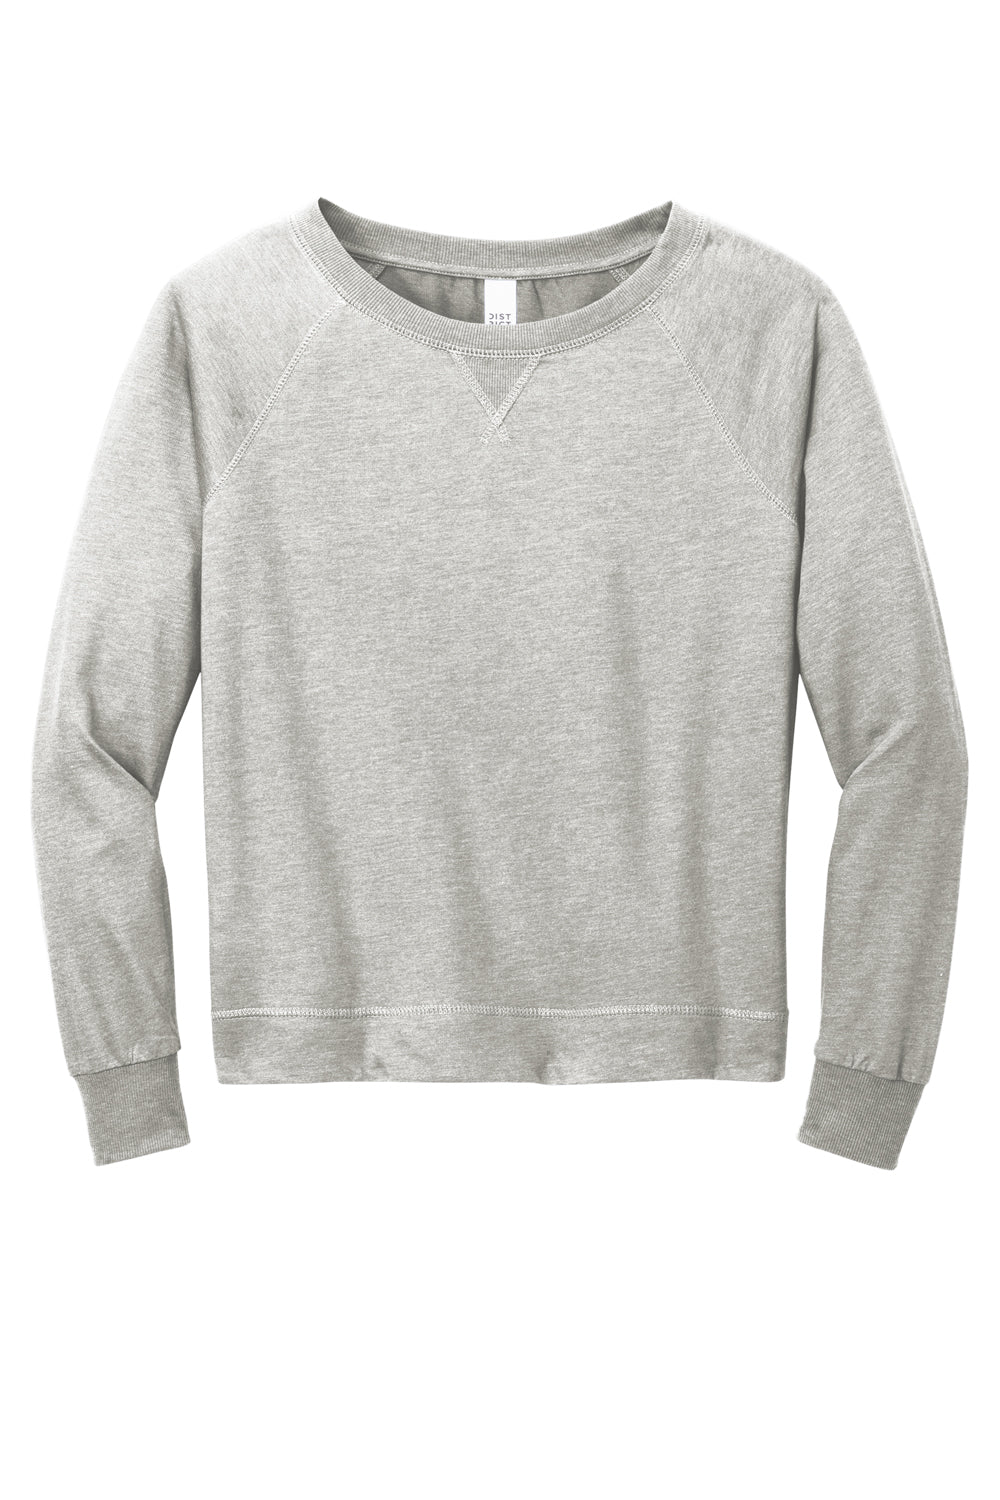 District Womens French Terry Long Sleeve Crewneck Sweatshirt Heather Light Grey Flat Front